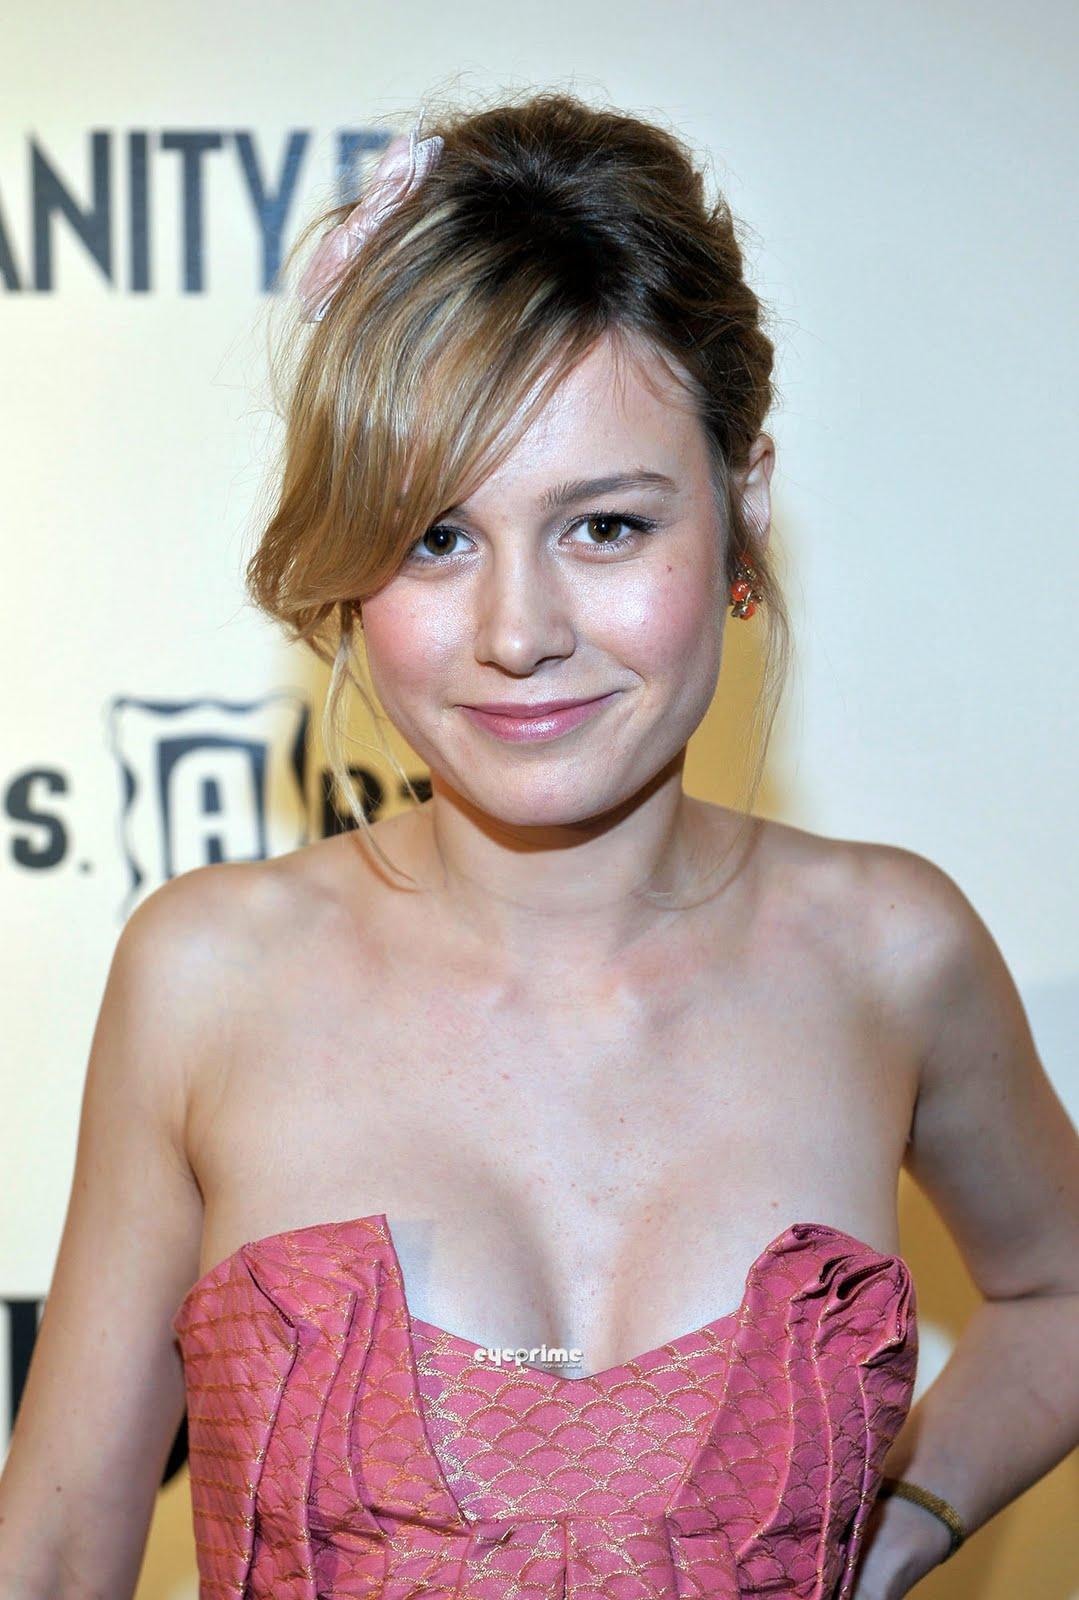 52 Hot And Sexy Pictures Of Brie Larson – Marvel’s Sexy Captain Marvel Heroine | Best Of Comic Books